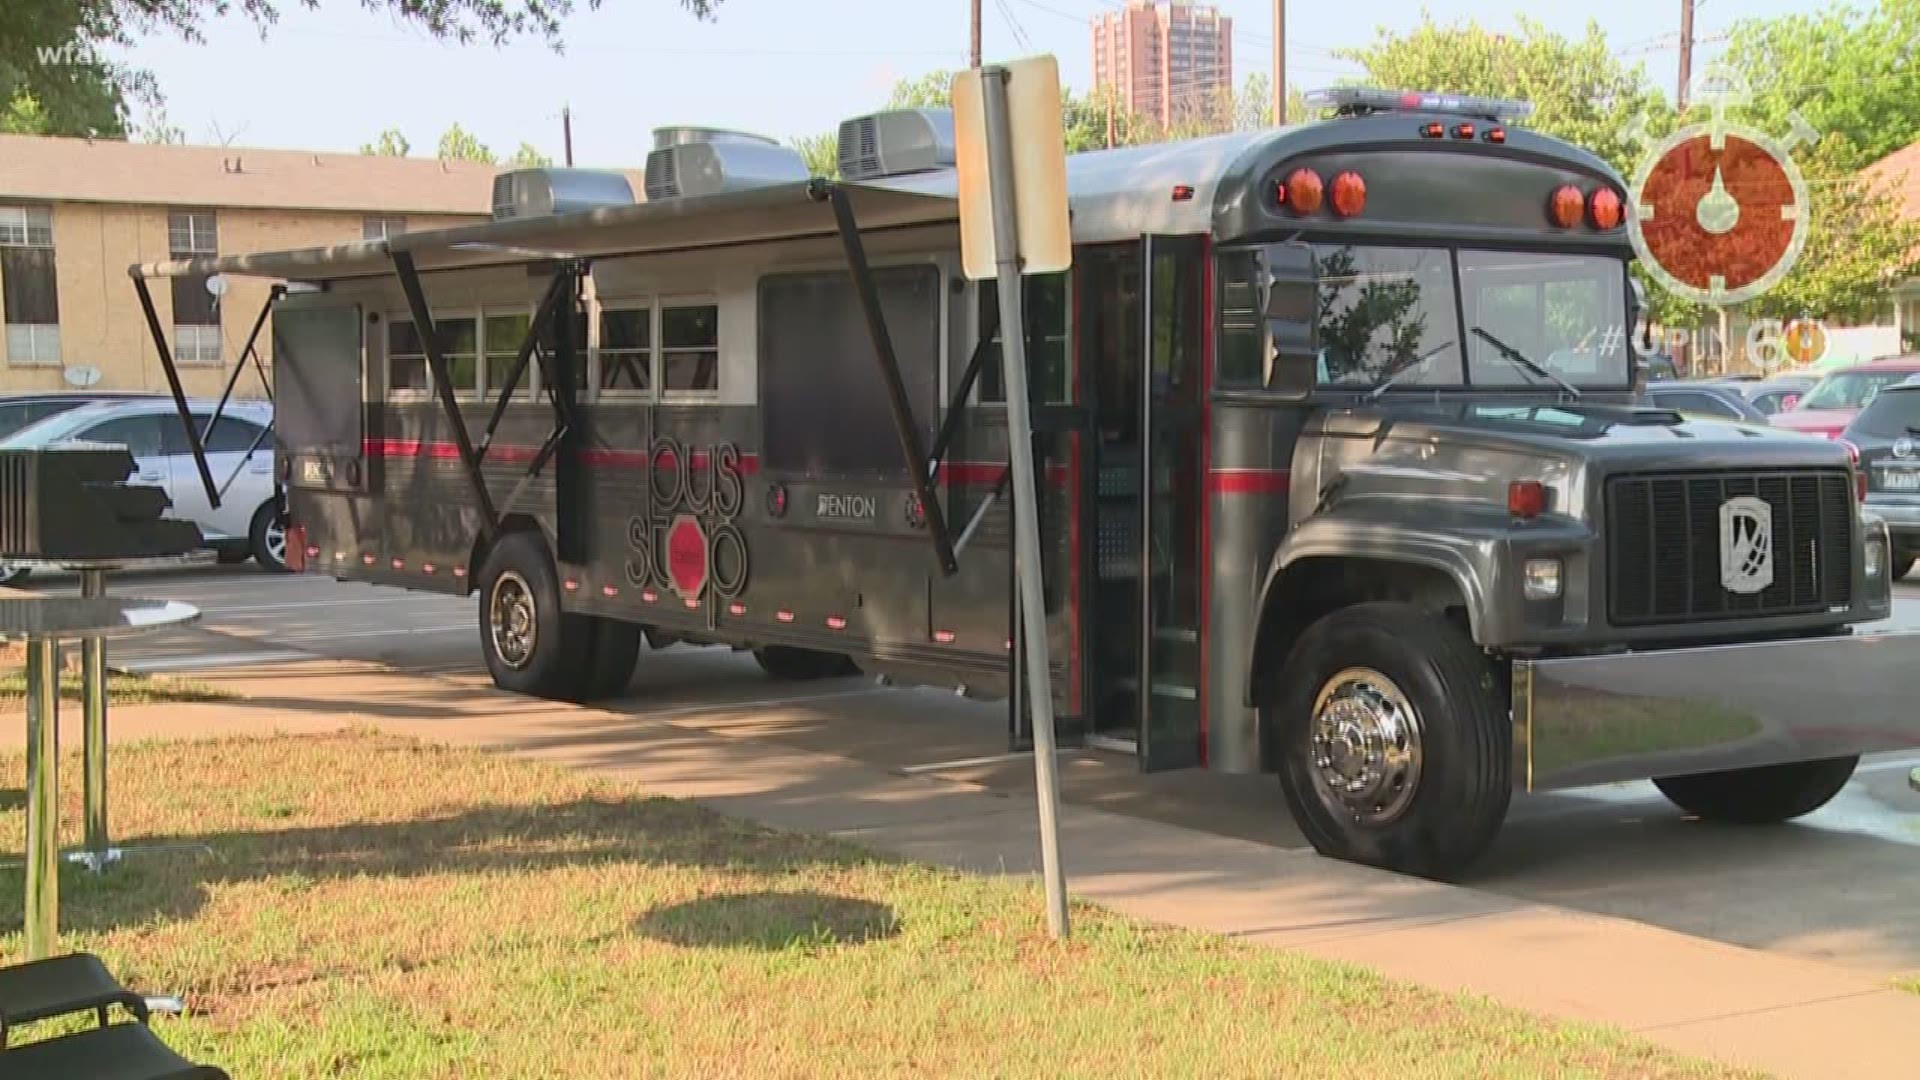 Denton ISD school bus converted into food bistro inspires students to jumpstart a career